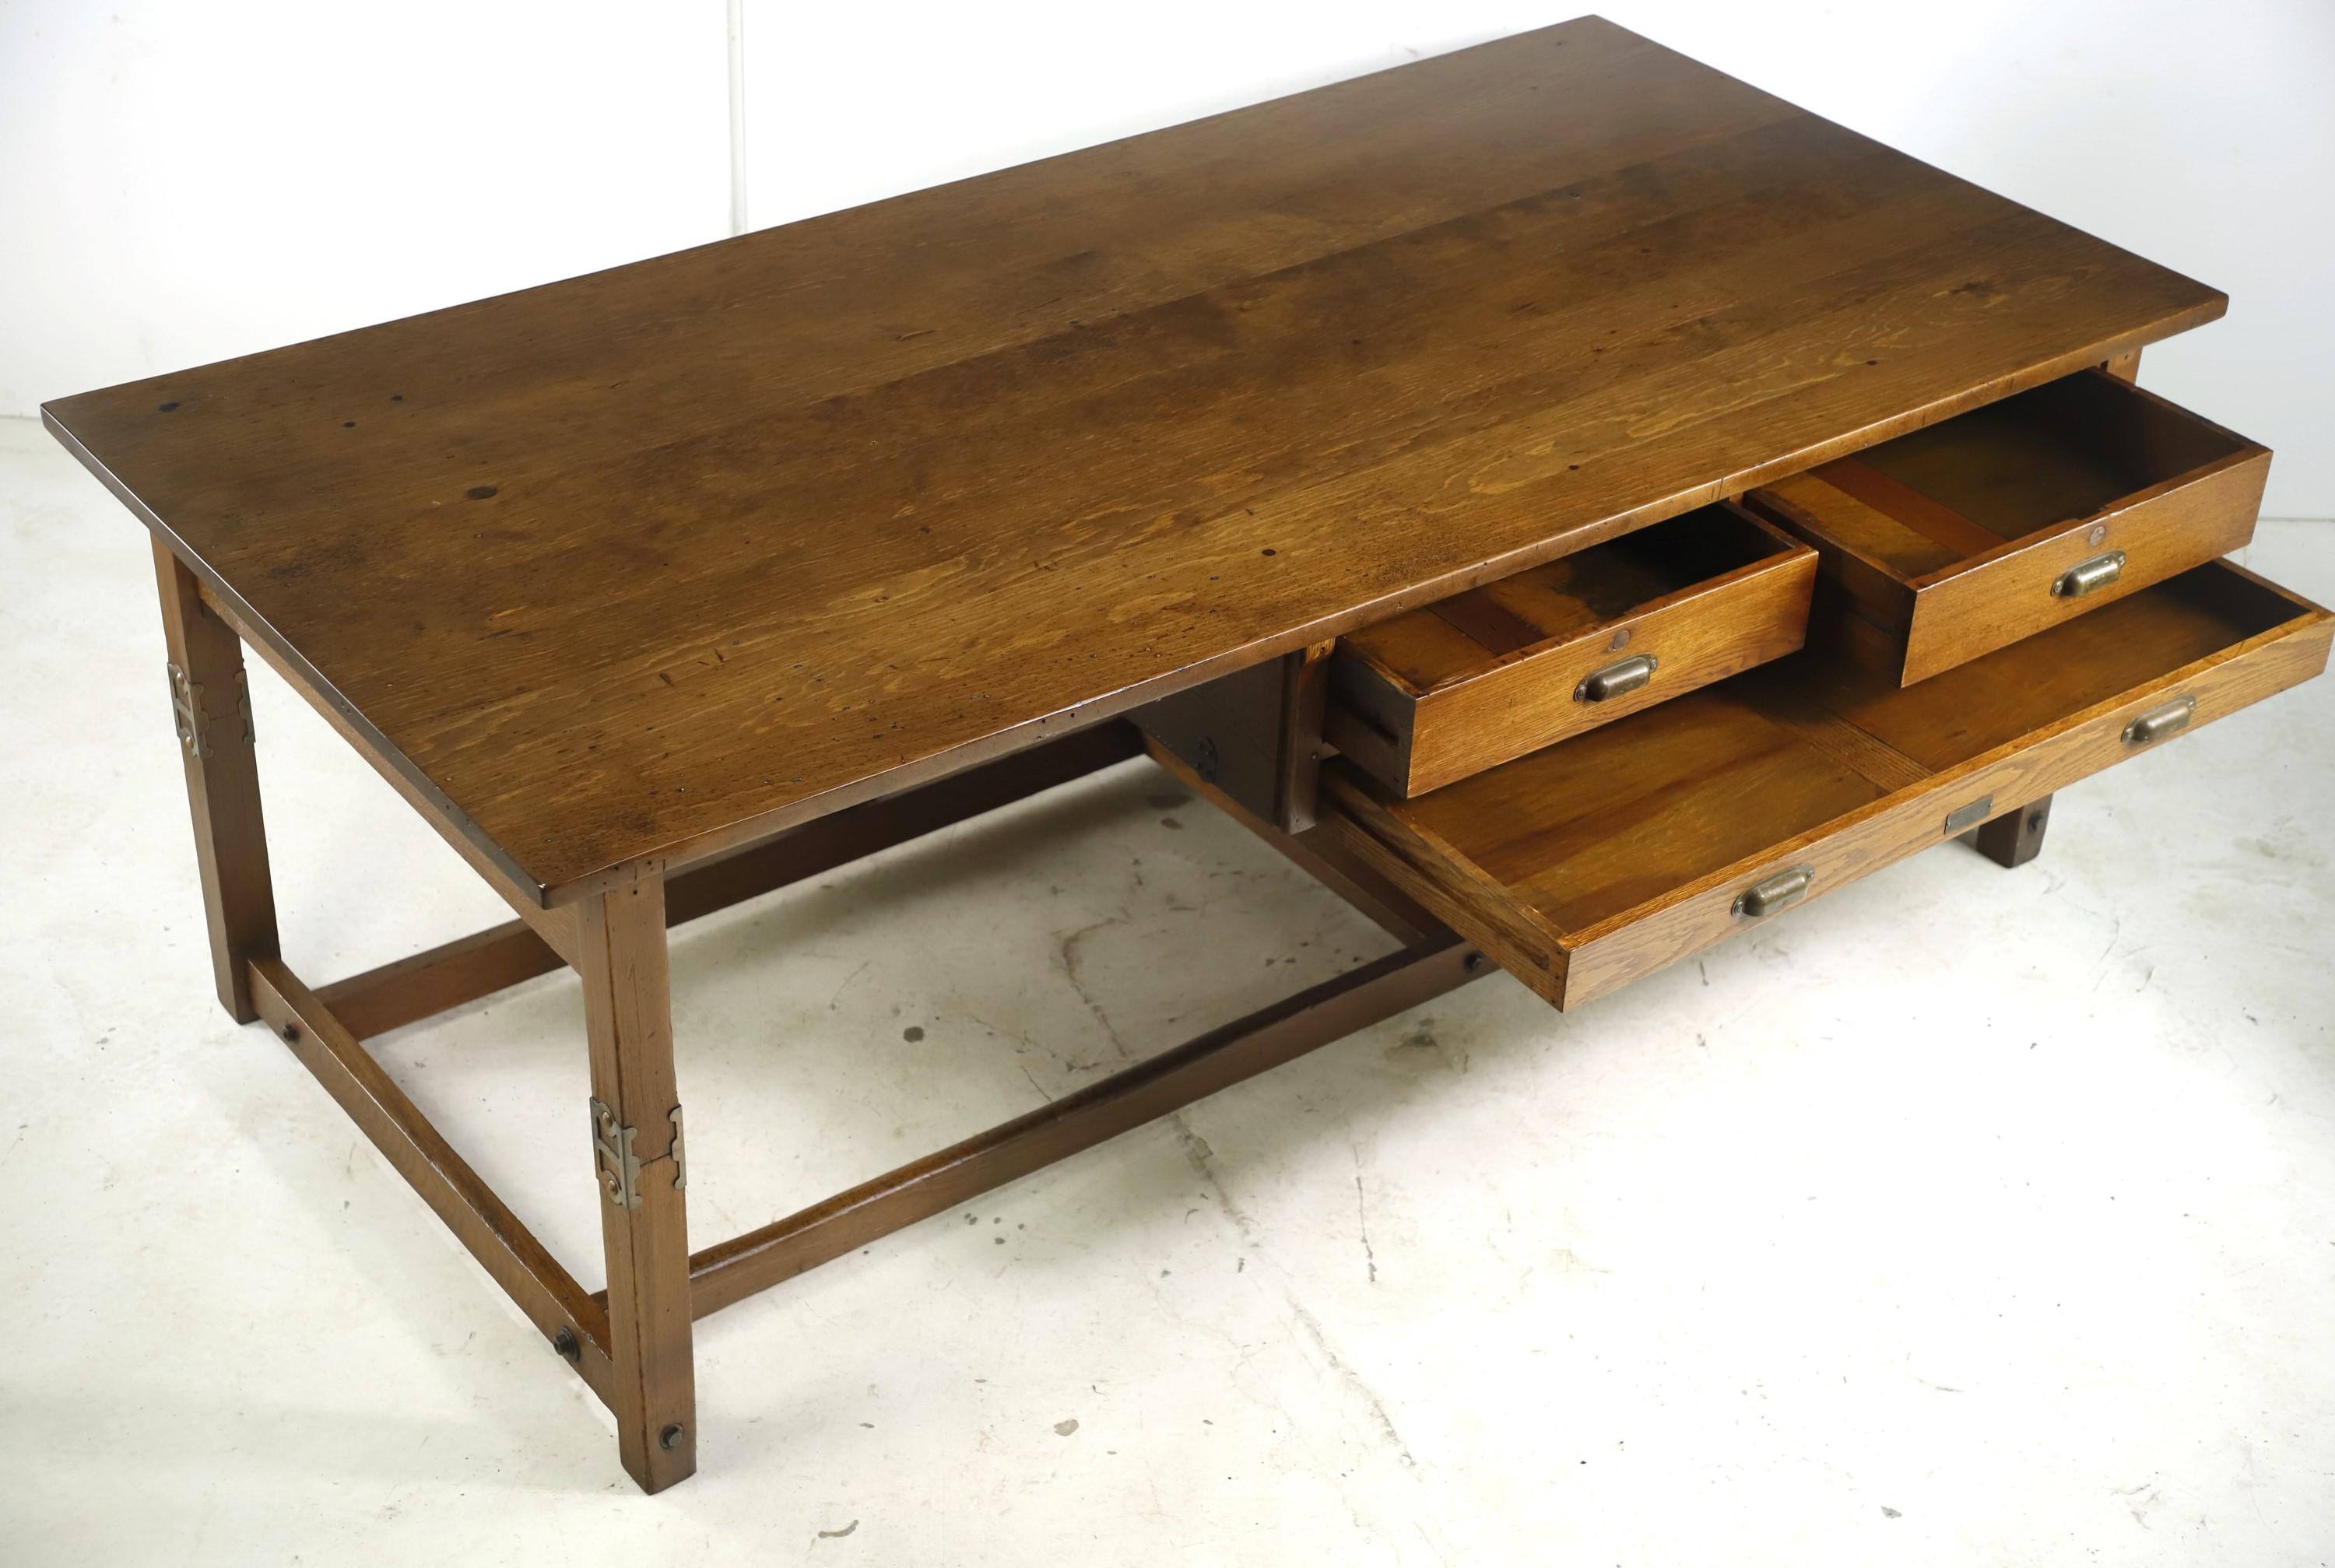 Large Industrial style early 20th century architect drawing table featuring an oak base and a pine top. Comes with three drawers, including one larger blueprint drawer, two regular drawers and original brass hardware. Manufactured by The Keuffel and